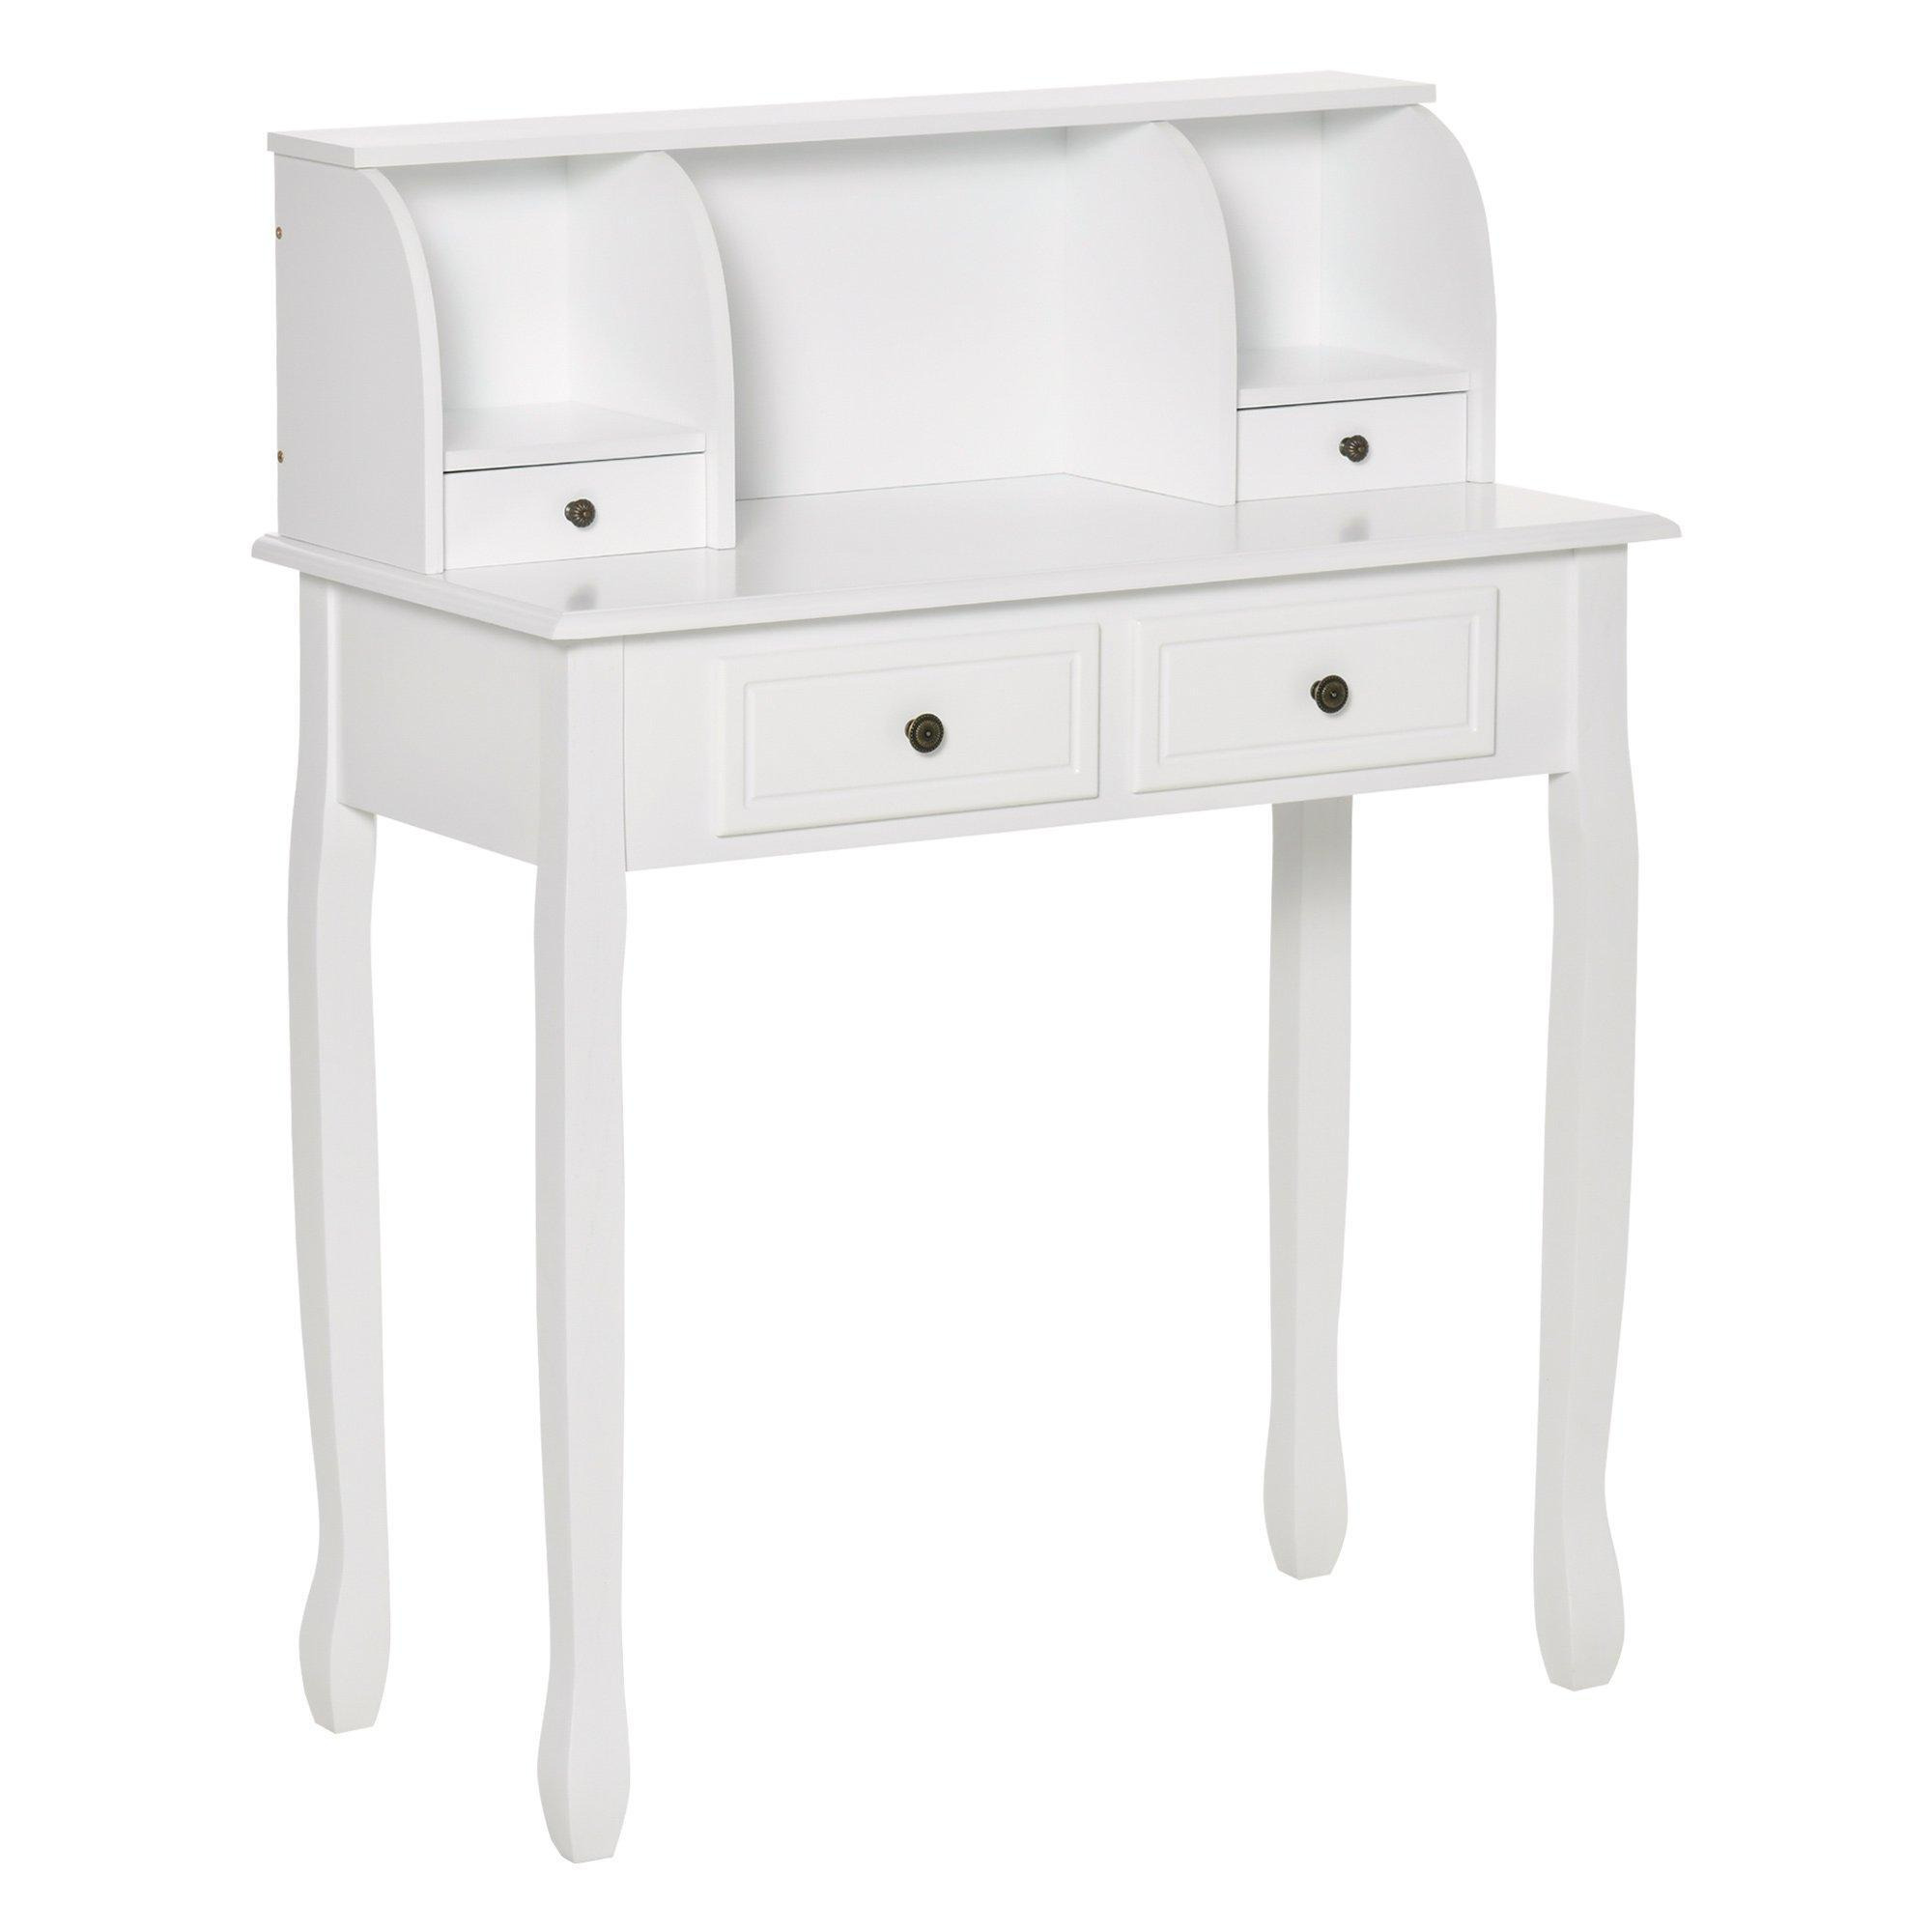 Dressing Table Vanity Make-Up 4 Drawers Console Bedroom Furniture Cosmetic White - image 1